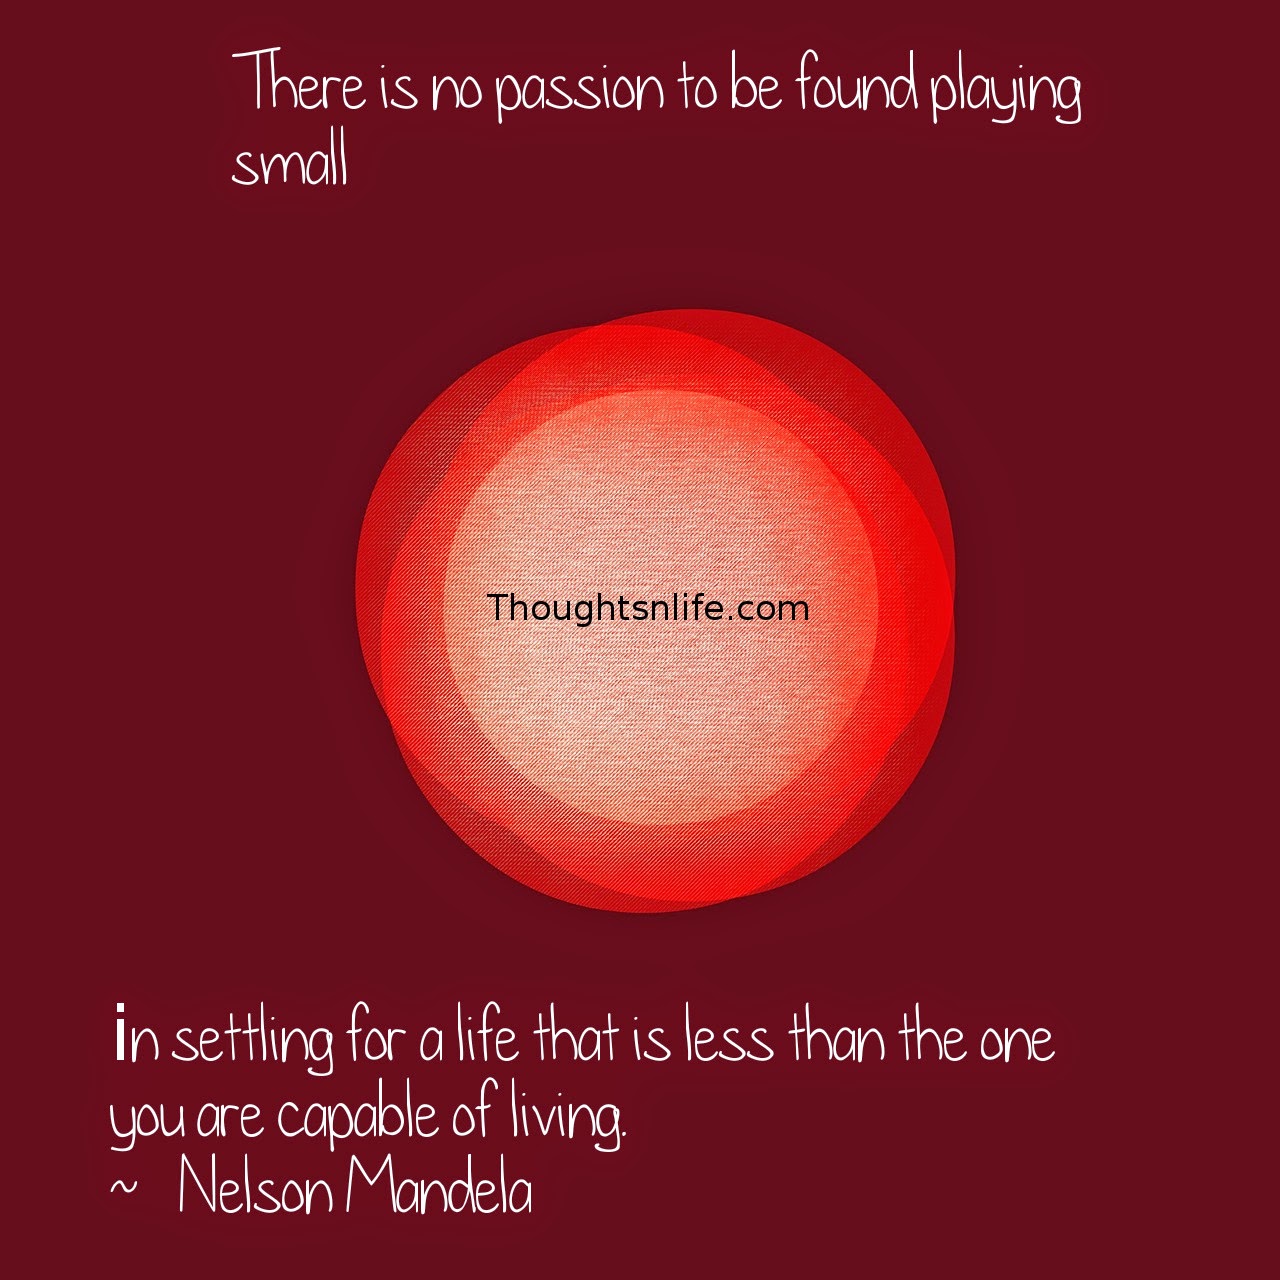 Thoughtsnlife.com: There is no passion to be found playing small - in settling for a life that is less than the one you are capable of living.  ~   Nelson Mandela